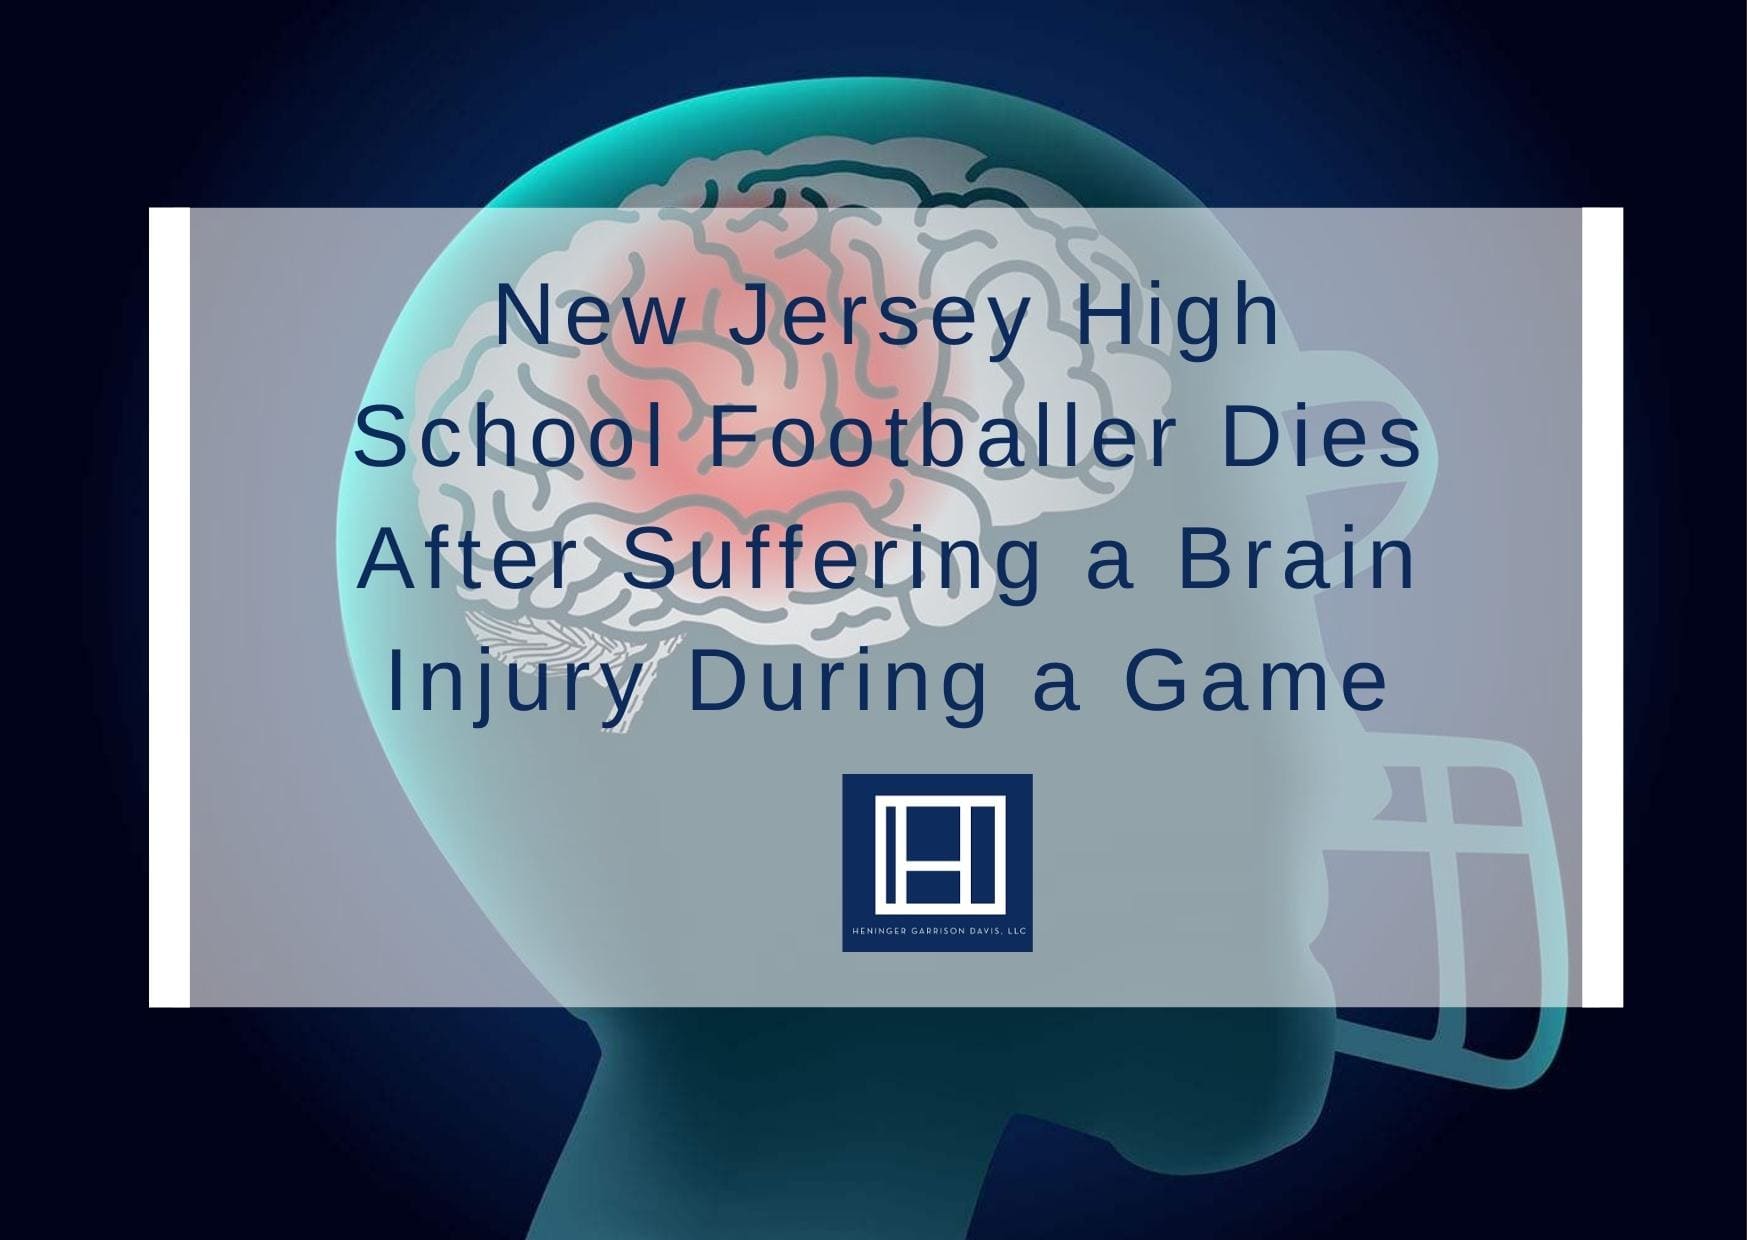 New Jersey High School Footballer Dies After Suffering a Brain Injury During a Game